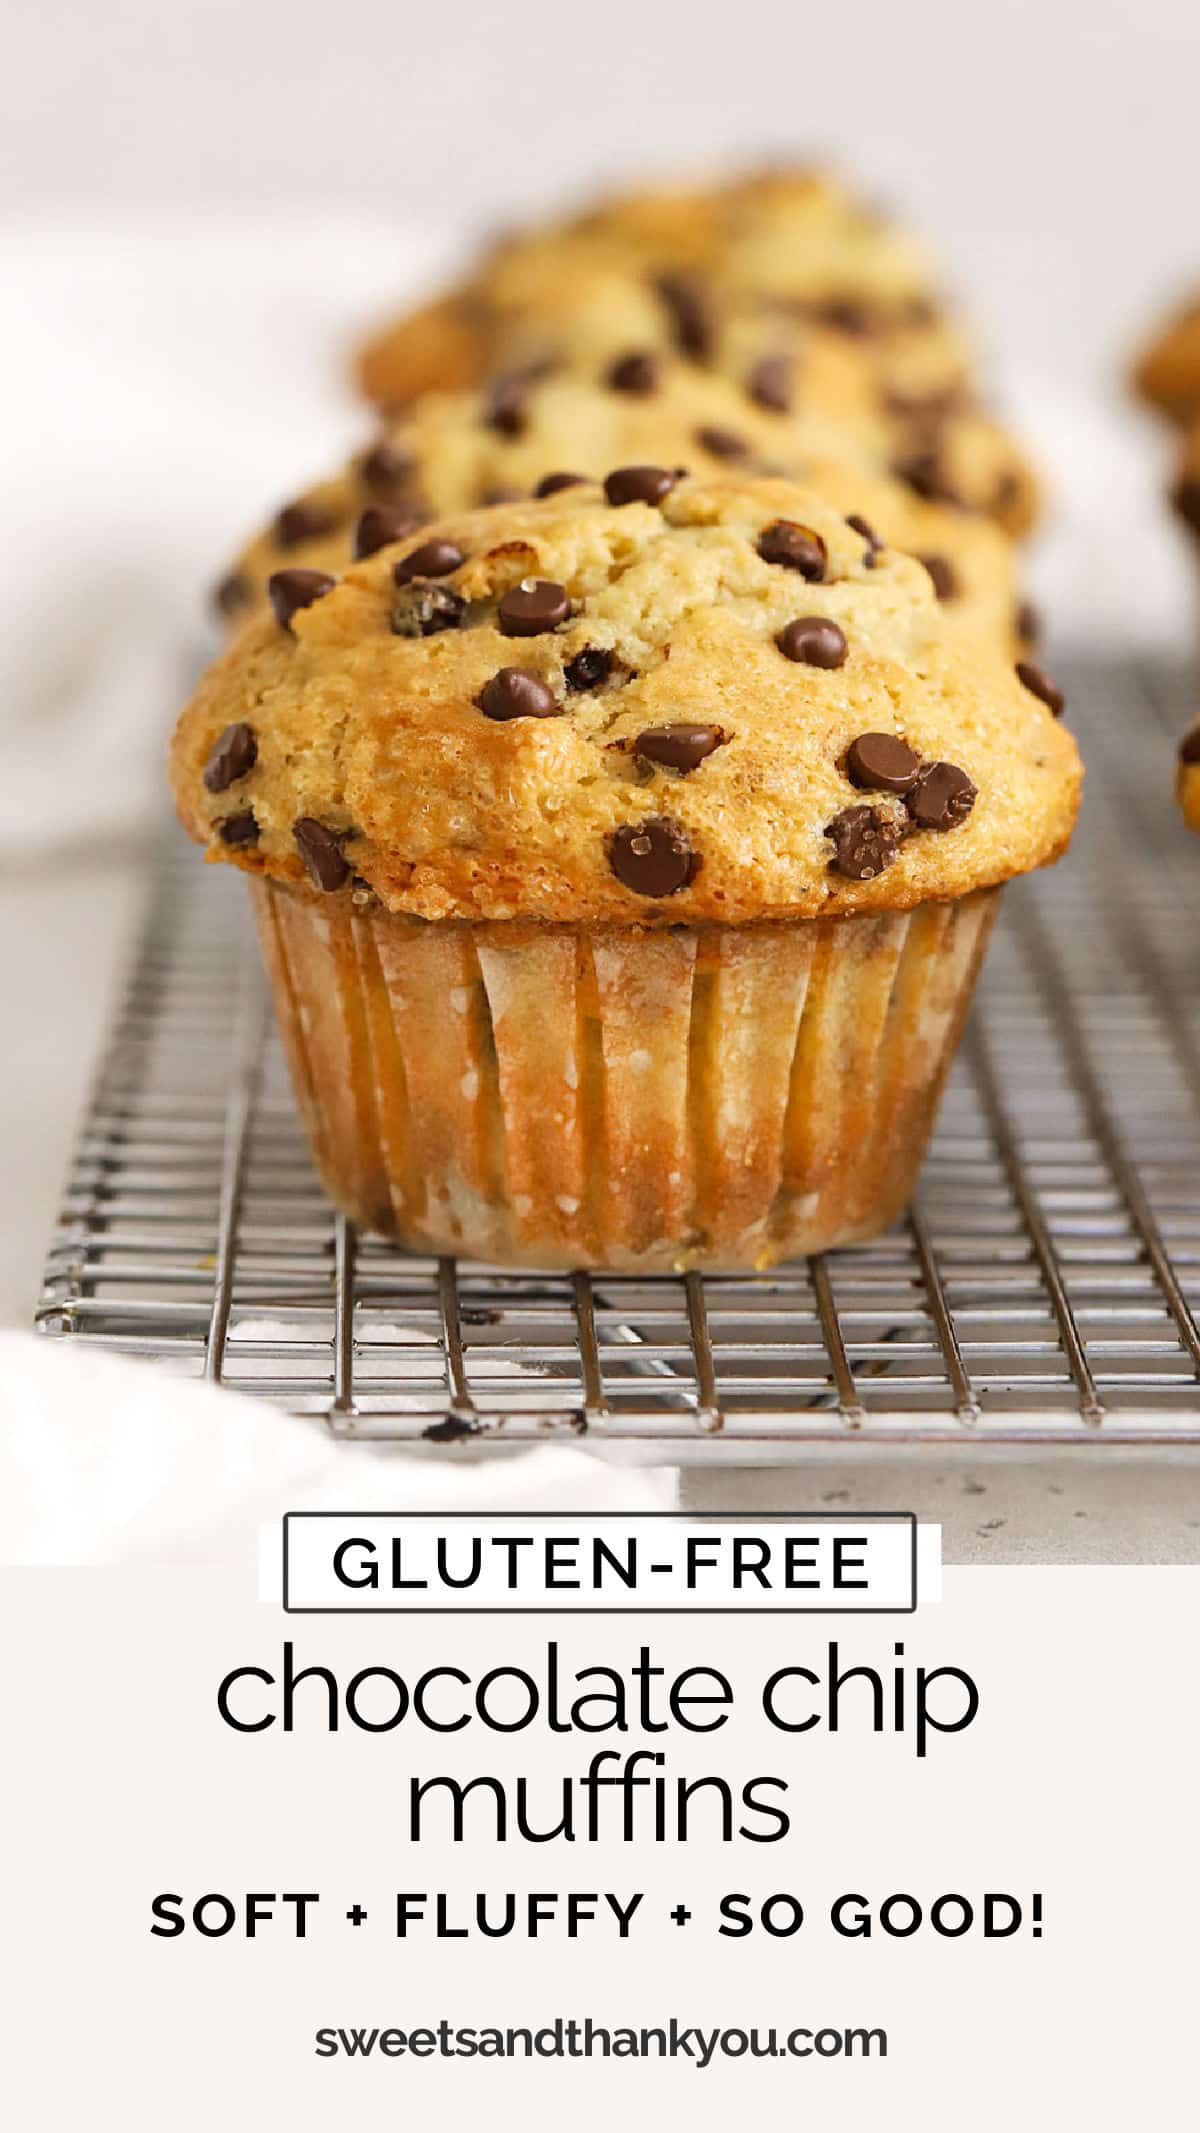 These bakery-style gluten-free chocolate chip muffins are light, fluffy, and packed with mini chocolate chips. They're a perfect brunch favorite! / gluten-free muffins recipe / gluten-free muffin recipe / gluten-free brunch / gluten-free breakfast / gluten-free chocolate chip muffin recipe / gluten-free bakery muffins / gluten-free bakery style muffins / easy gluten-free muffins / gluten-free muffins with chocolate chips /